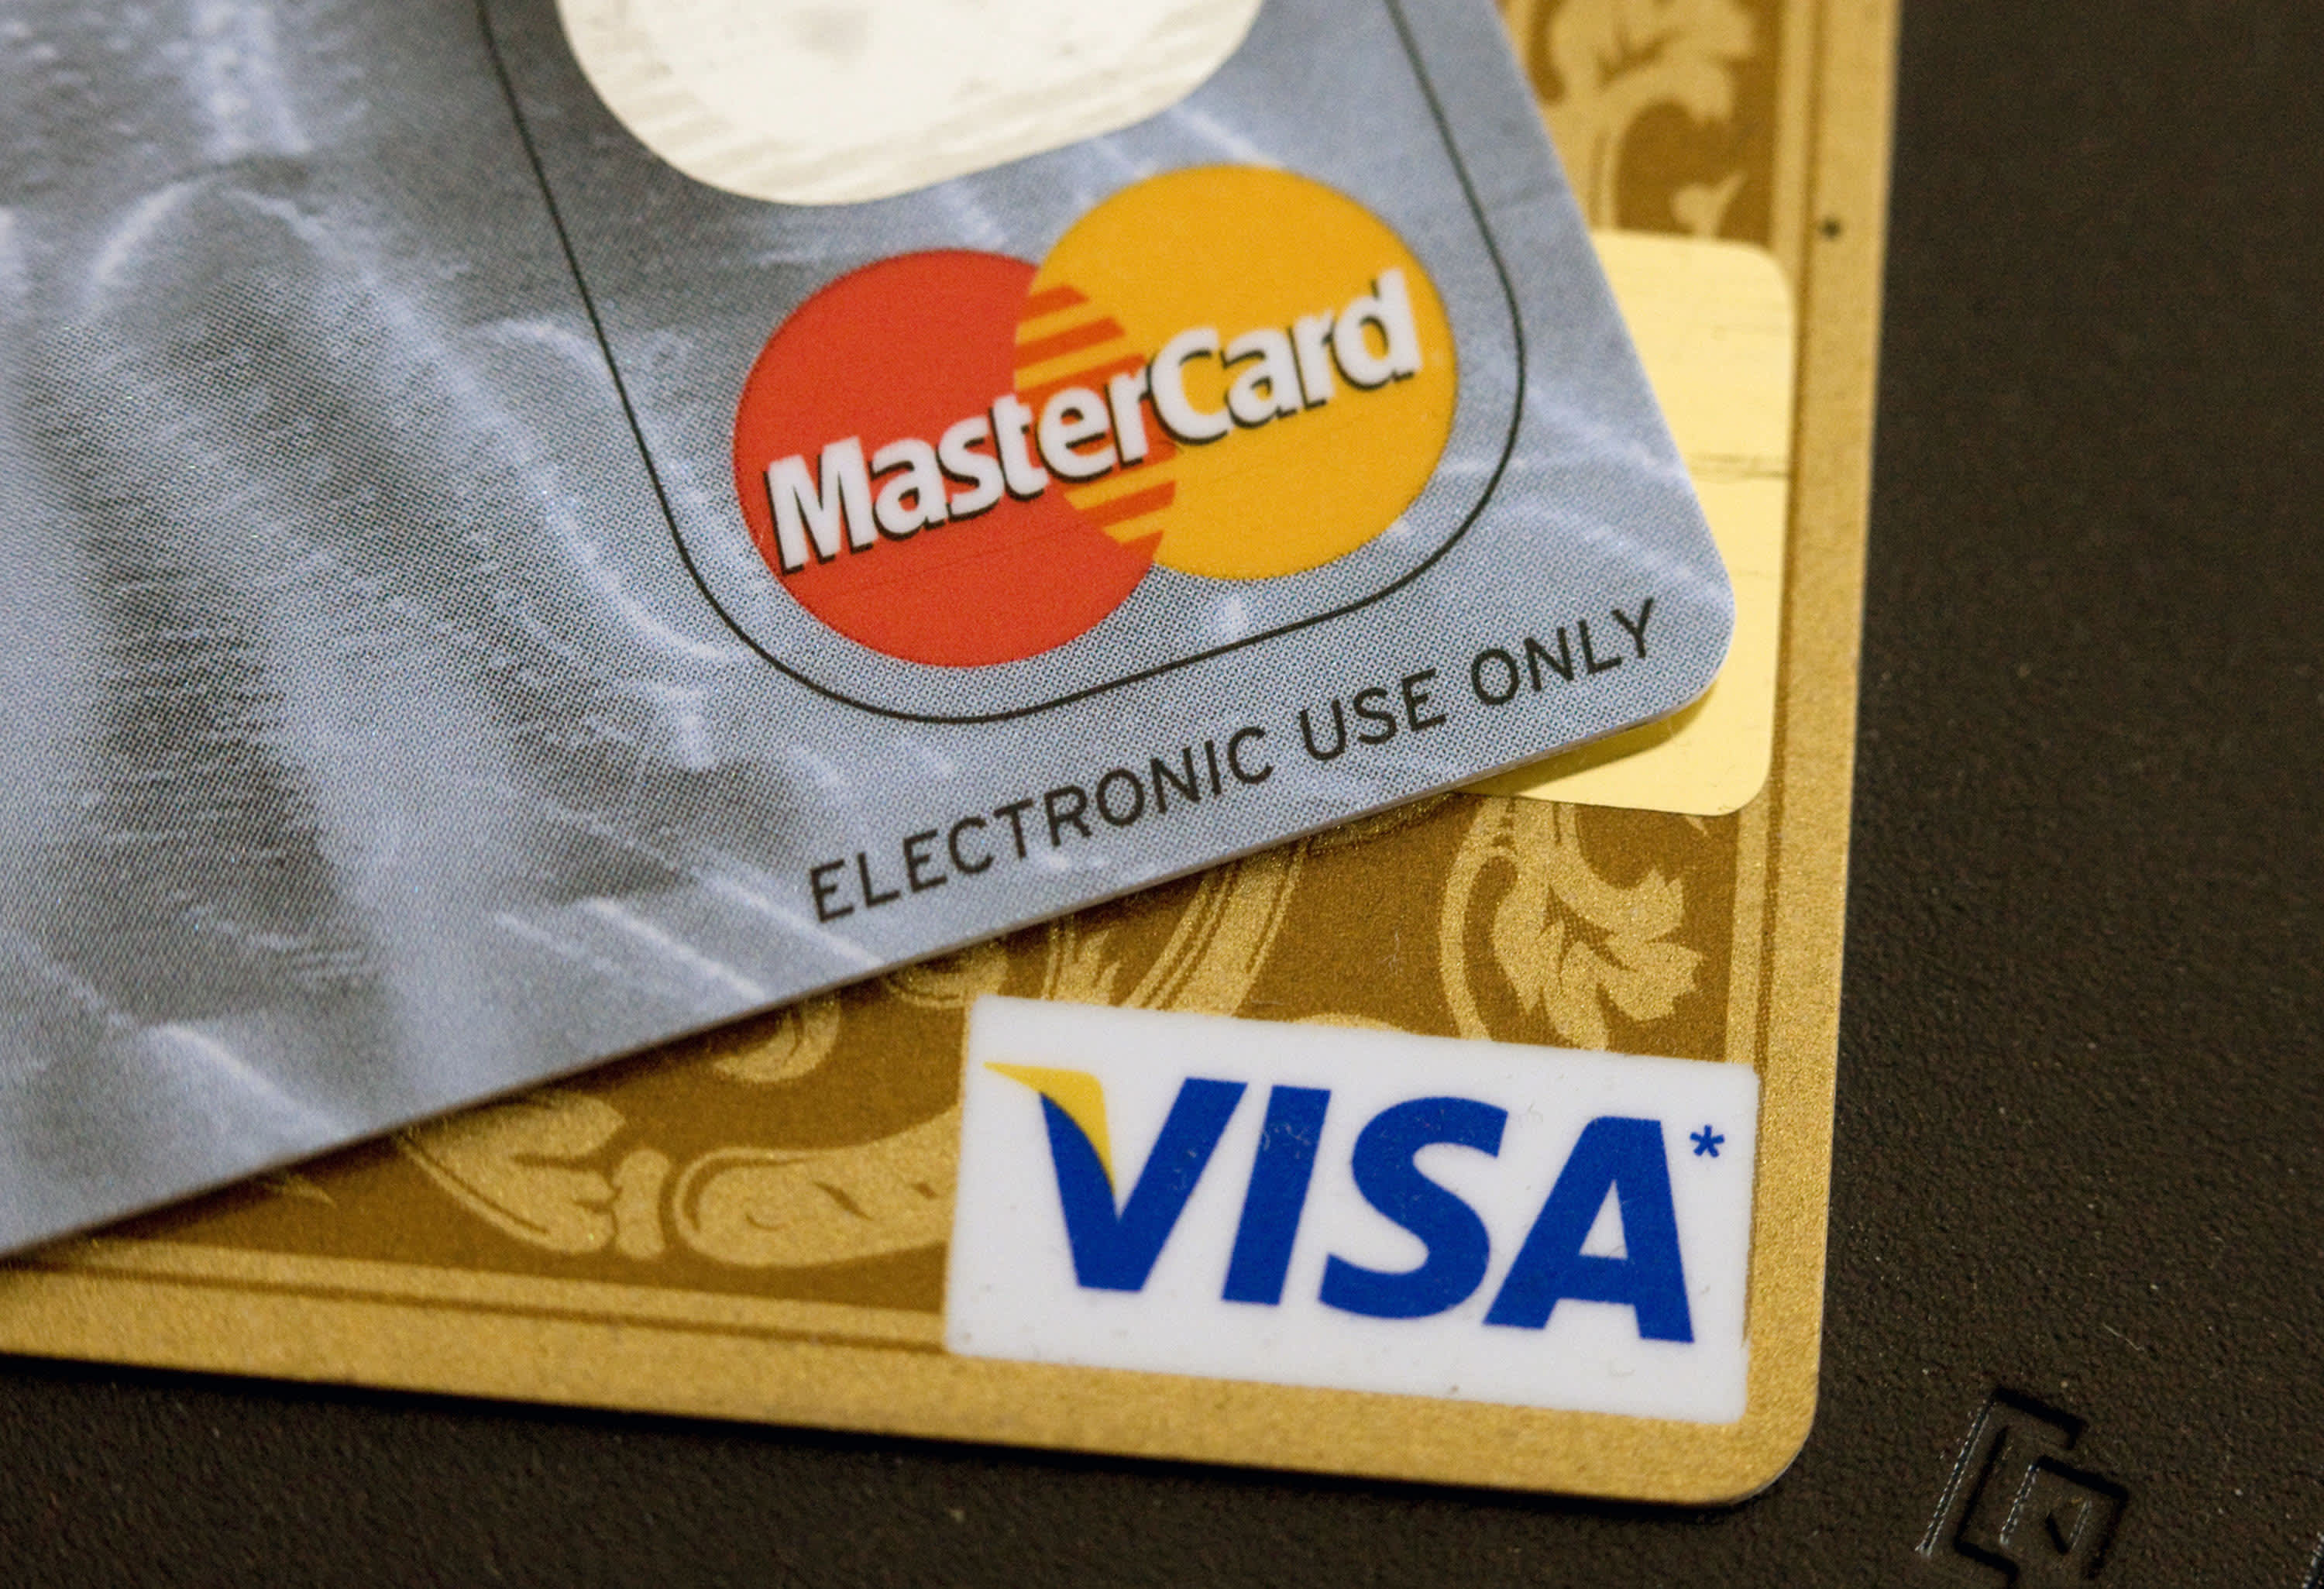 MasterCard posts earnings of 7.27 a share vs. 6.94 estimate